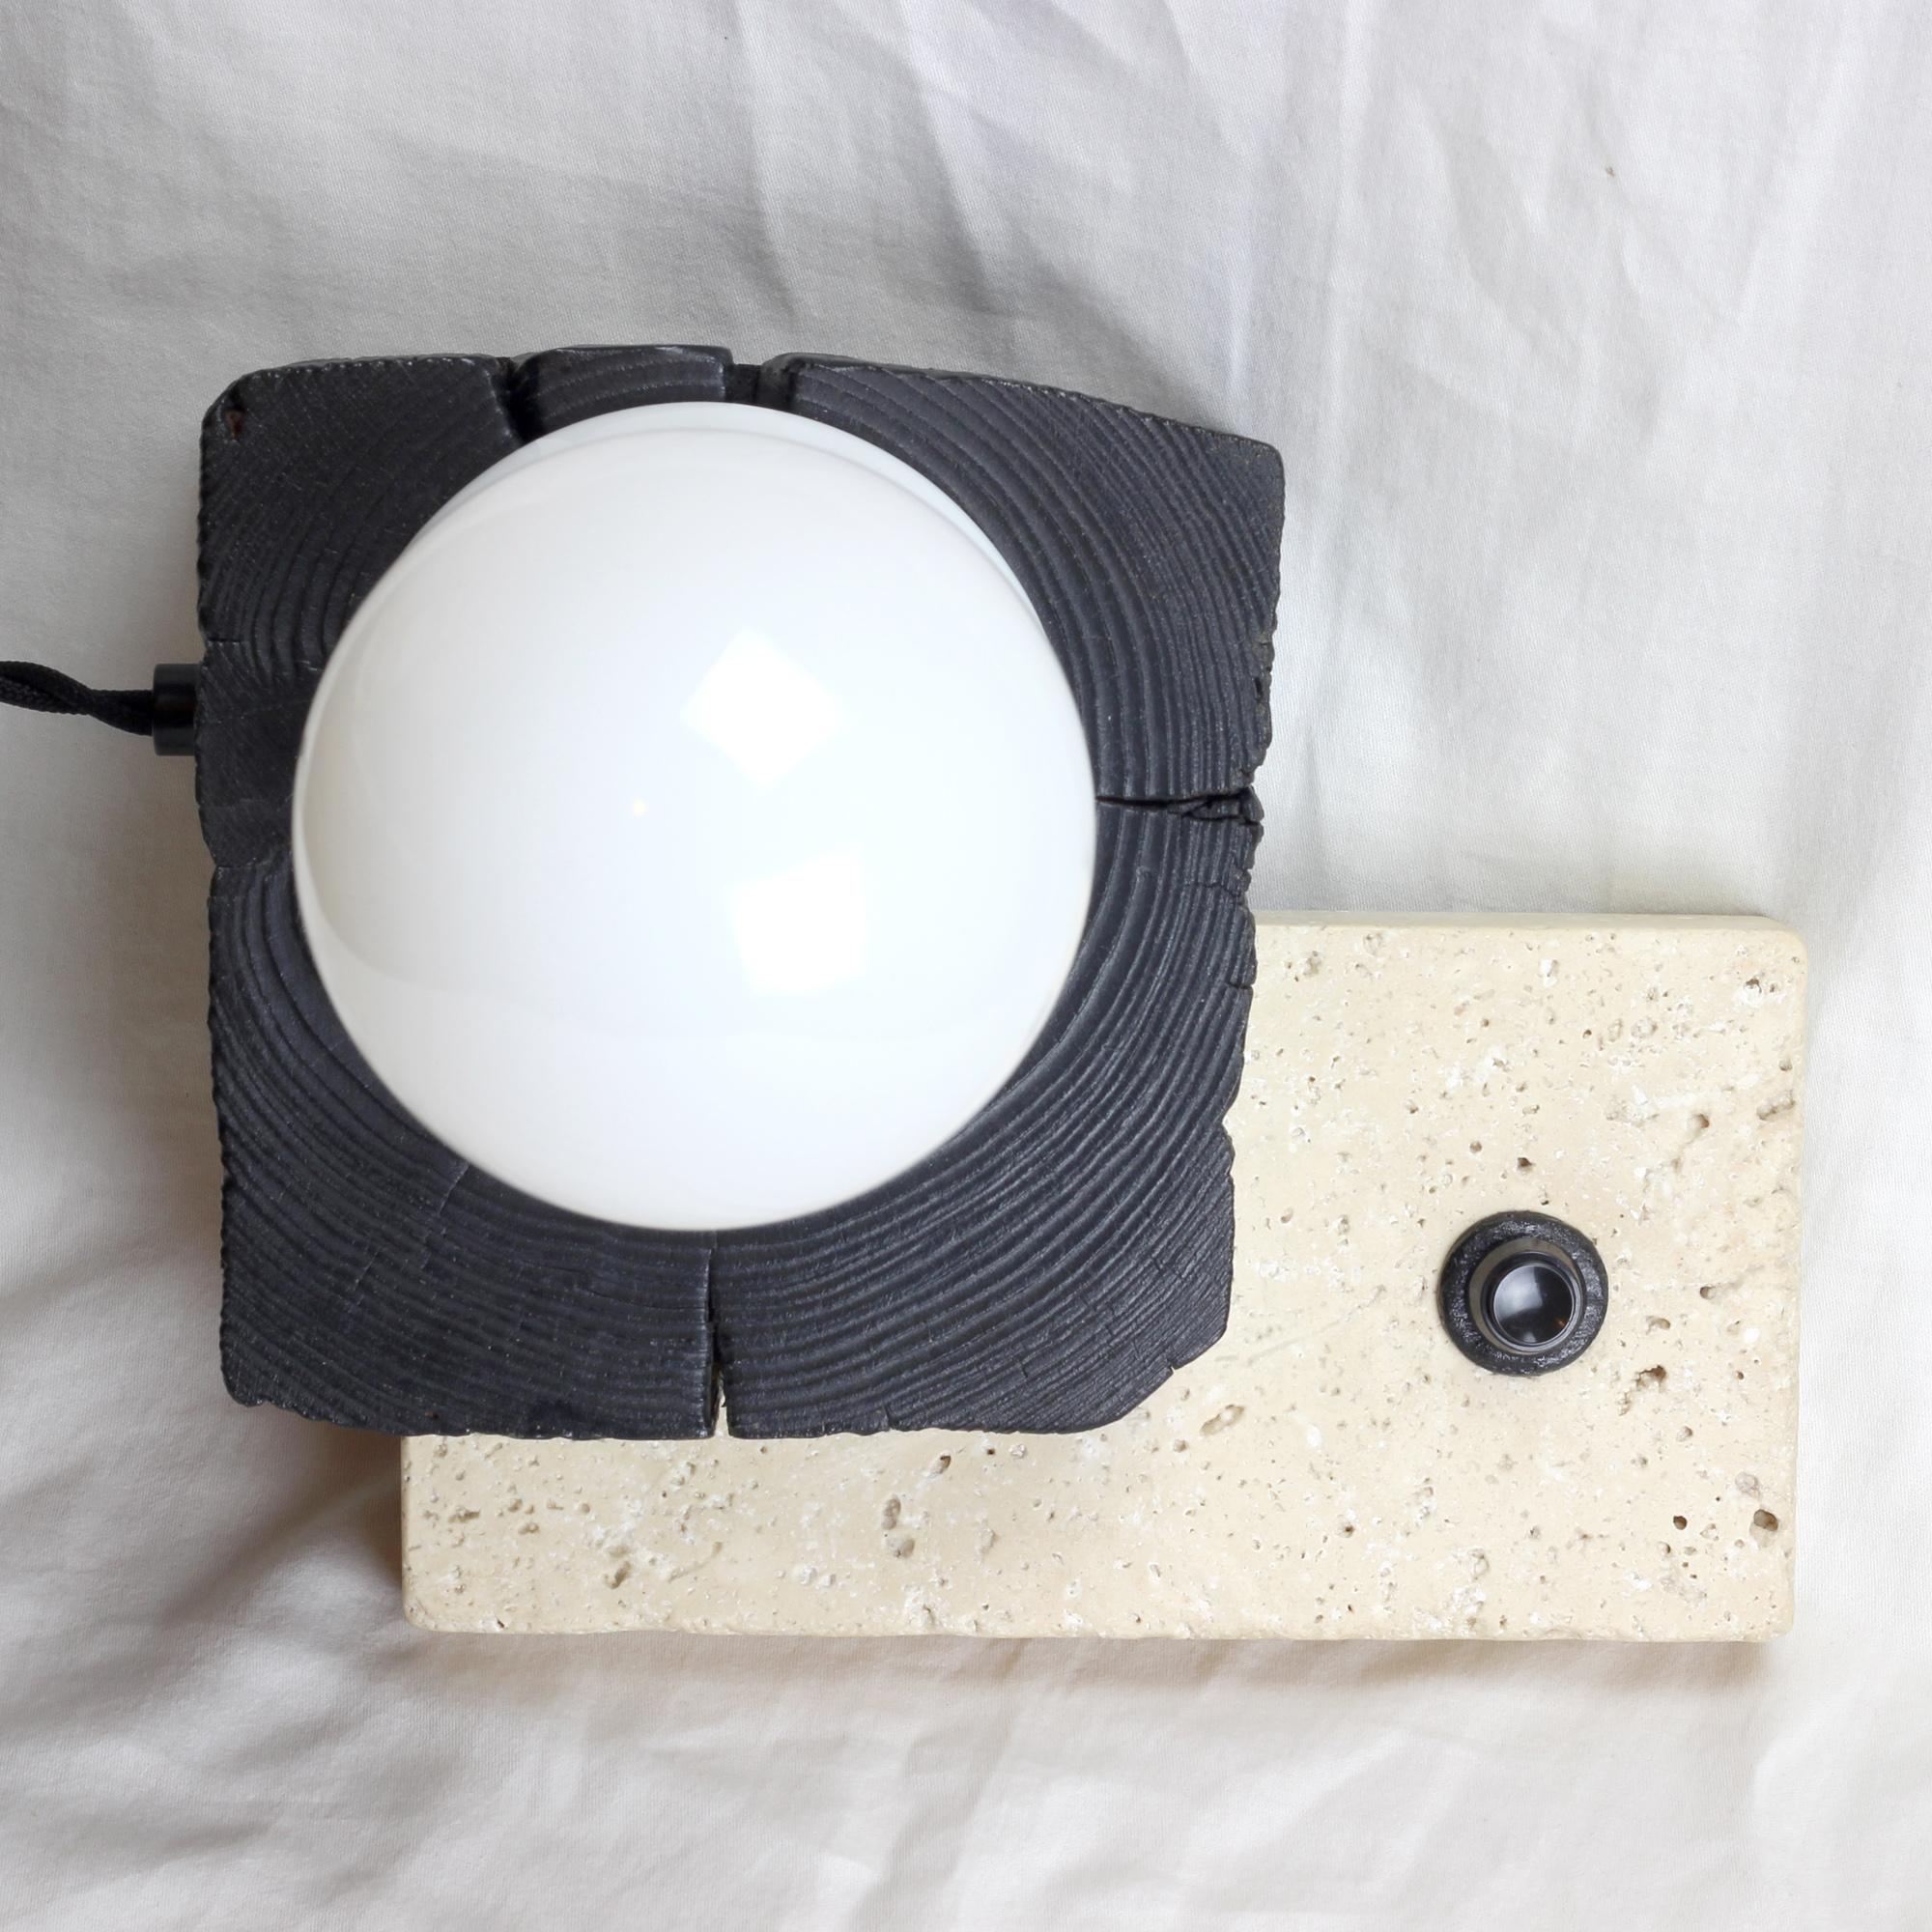 Woodwork Block, Sculptured Lighting, Table Lamp from Reclaimed Burned Wood and Stone For Sale